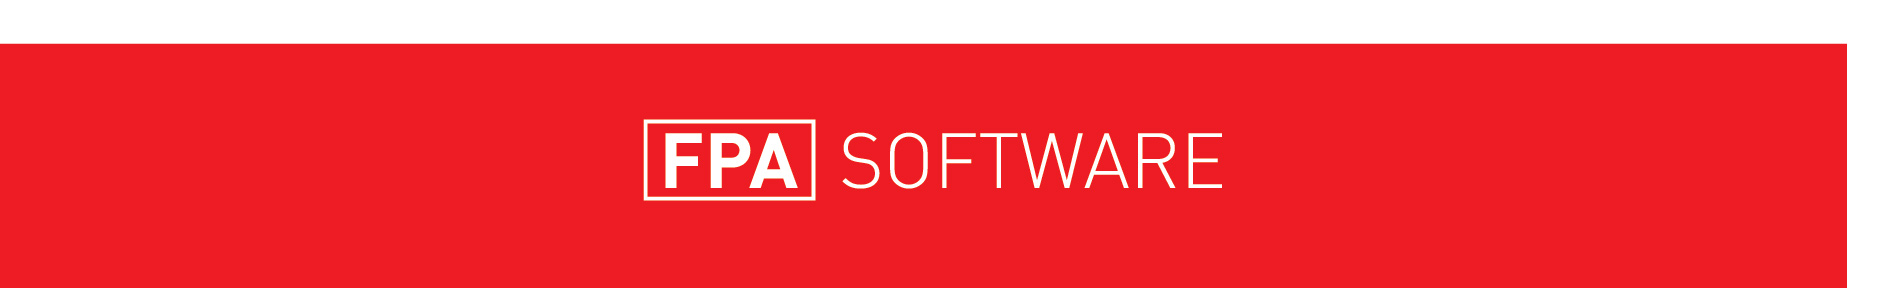 FPA Software